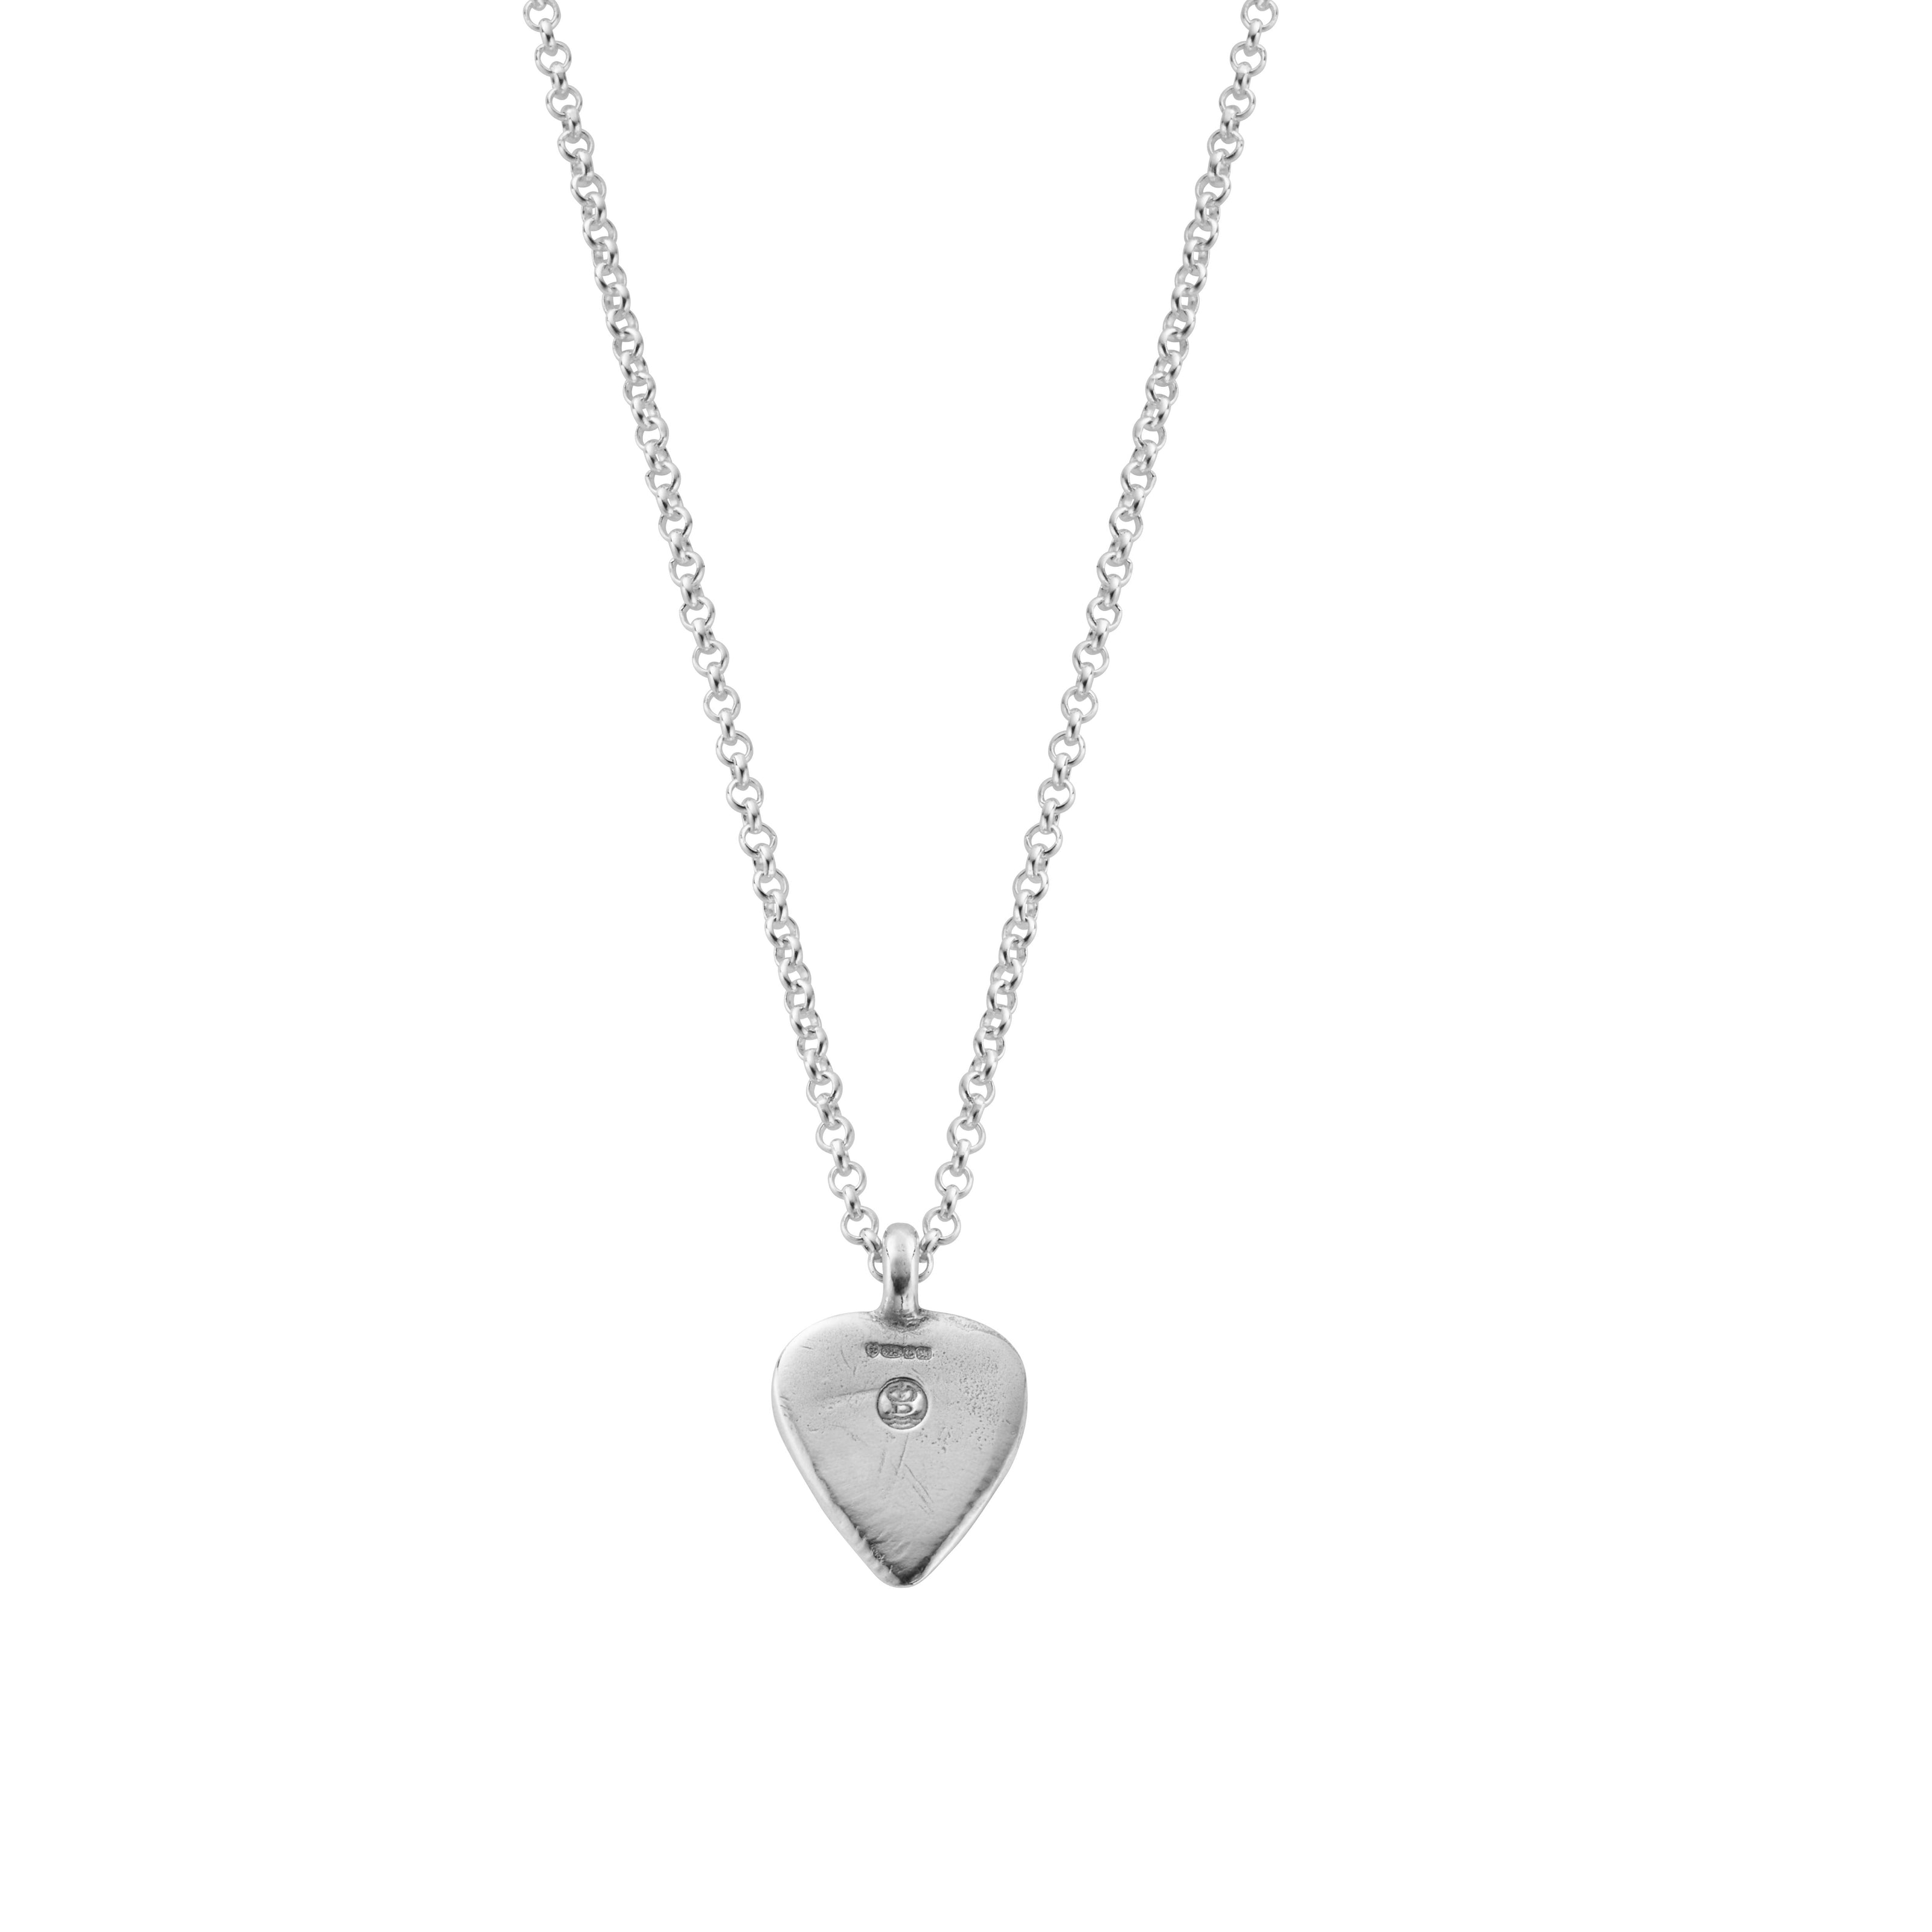 Silver Medium Happy Heart Necklace with Handwriting